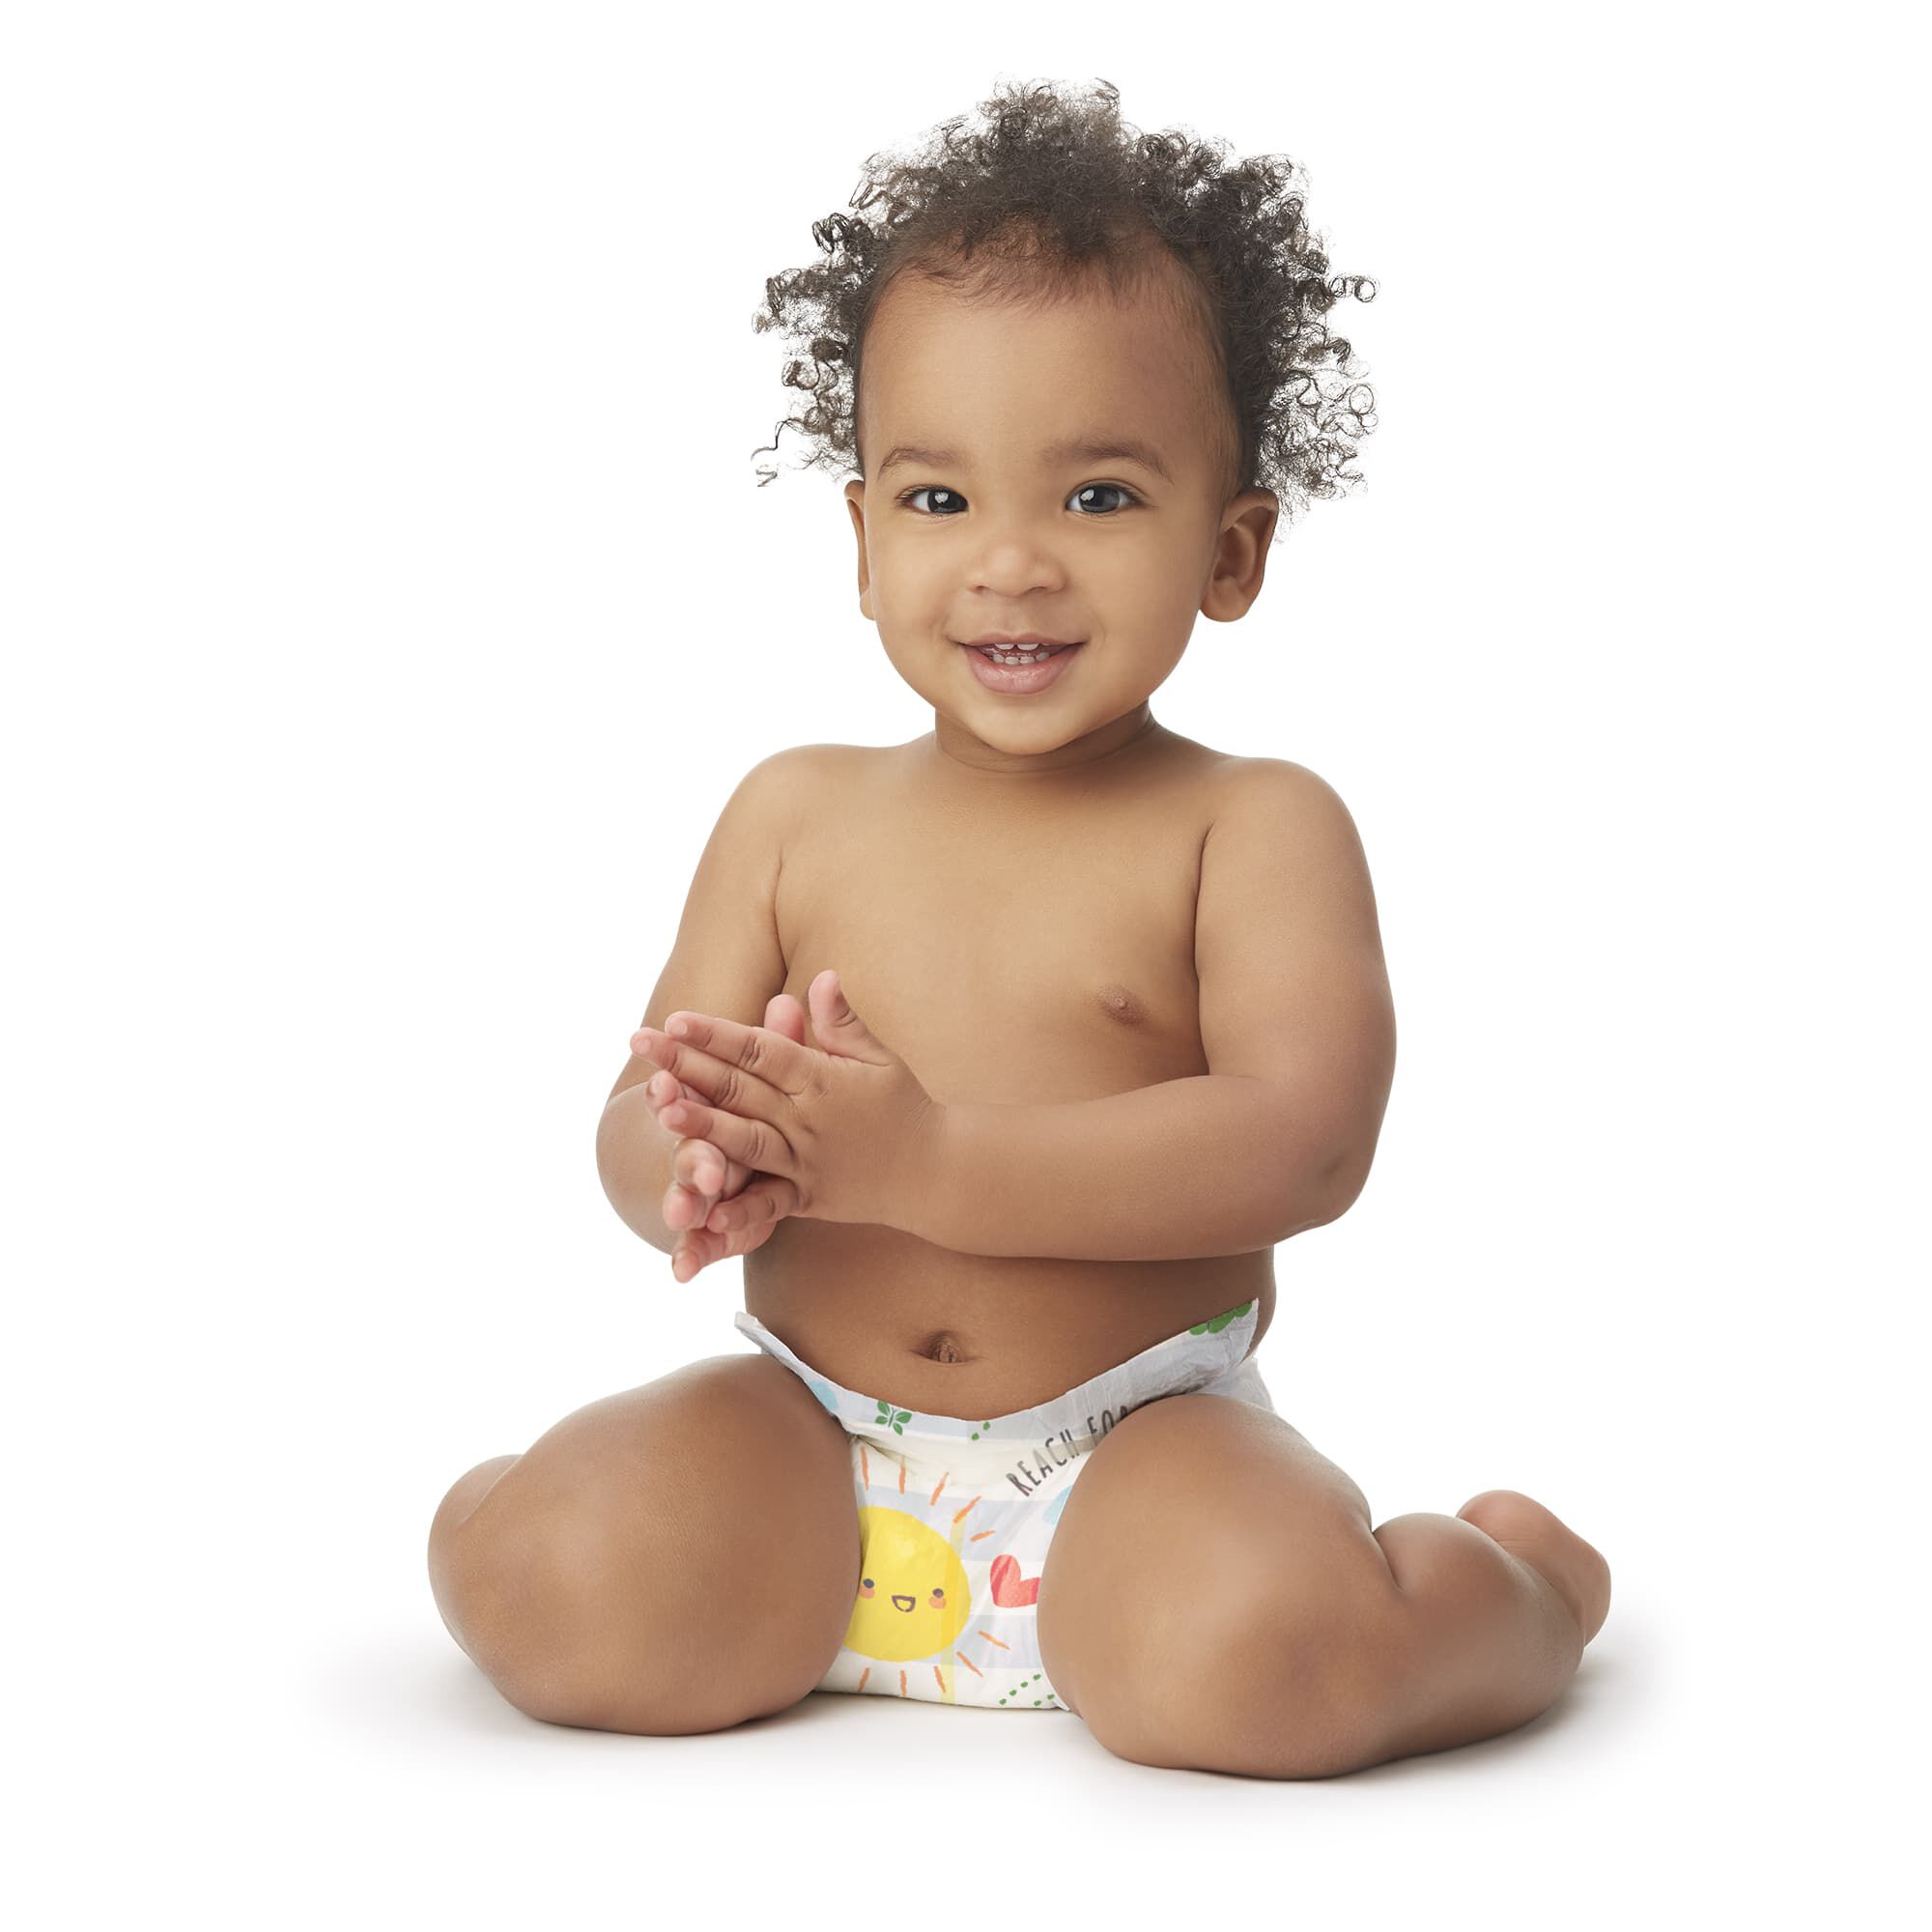 Clean Conscious Diaper, Spread Your Wings, Size 1